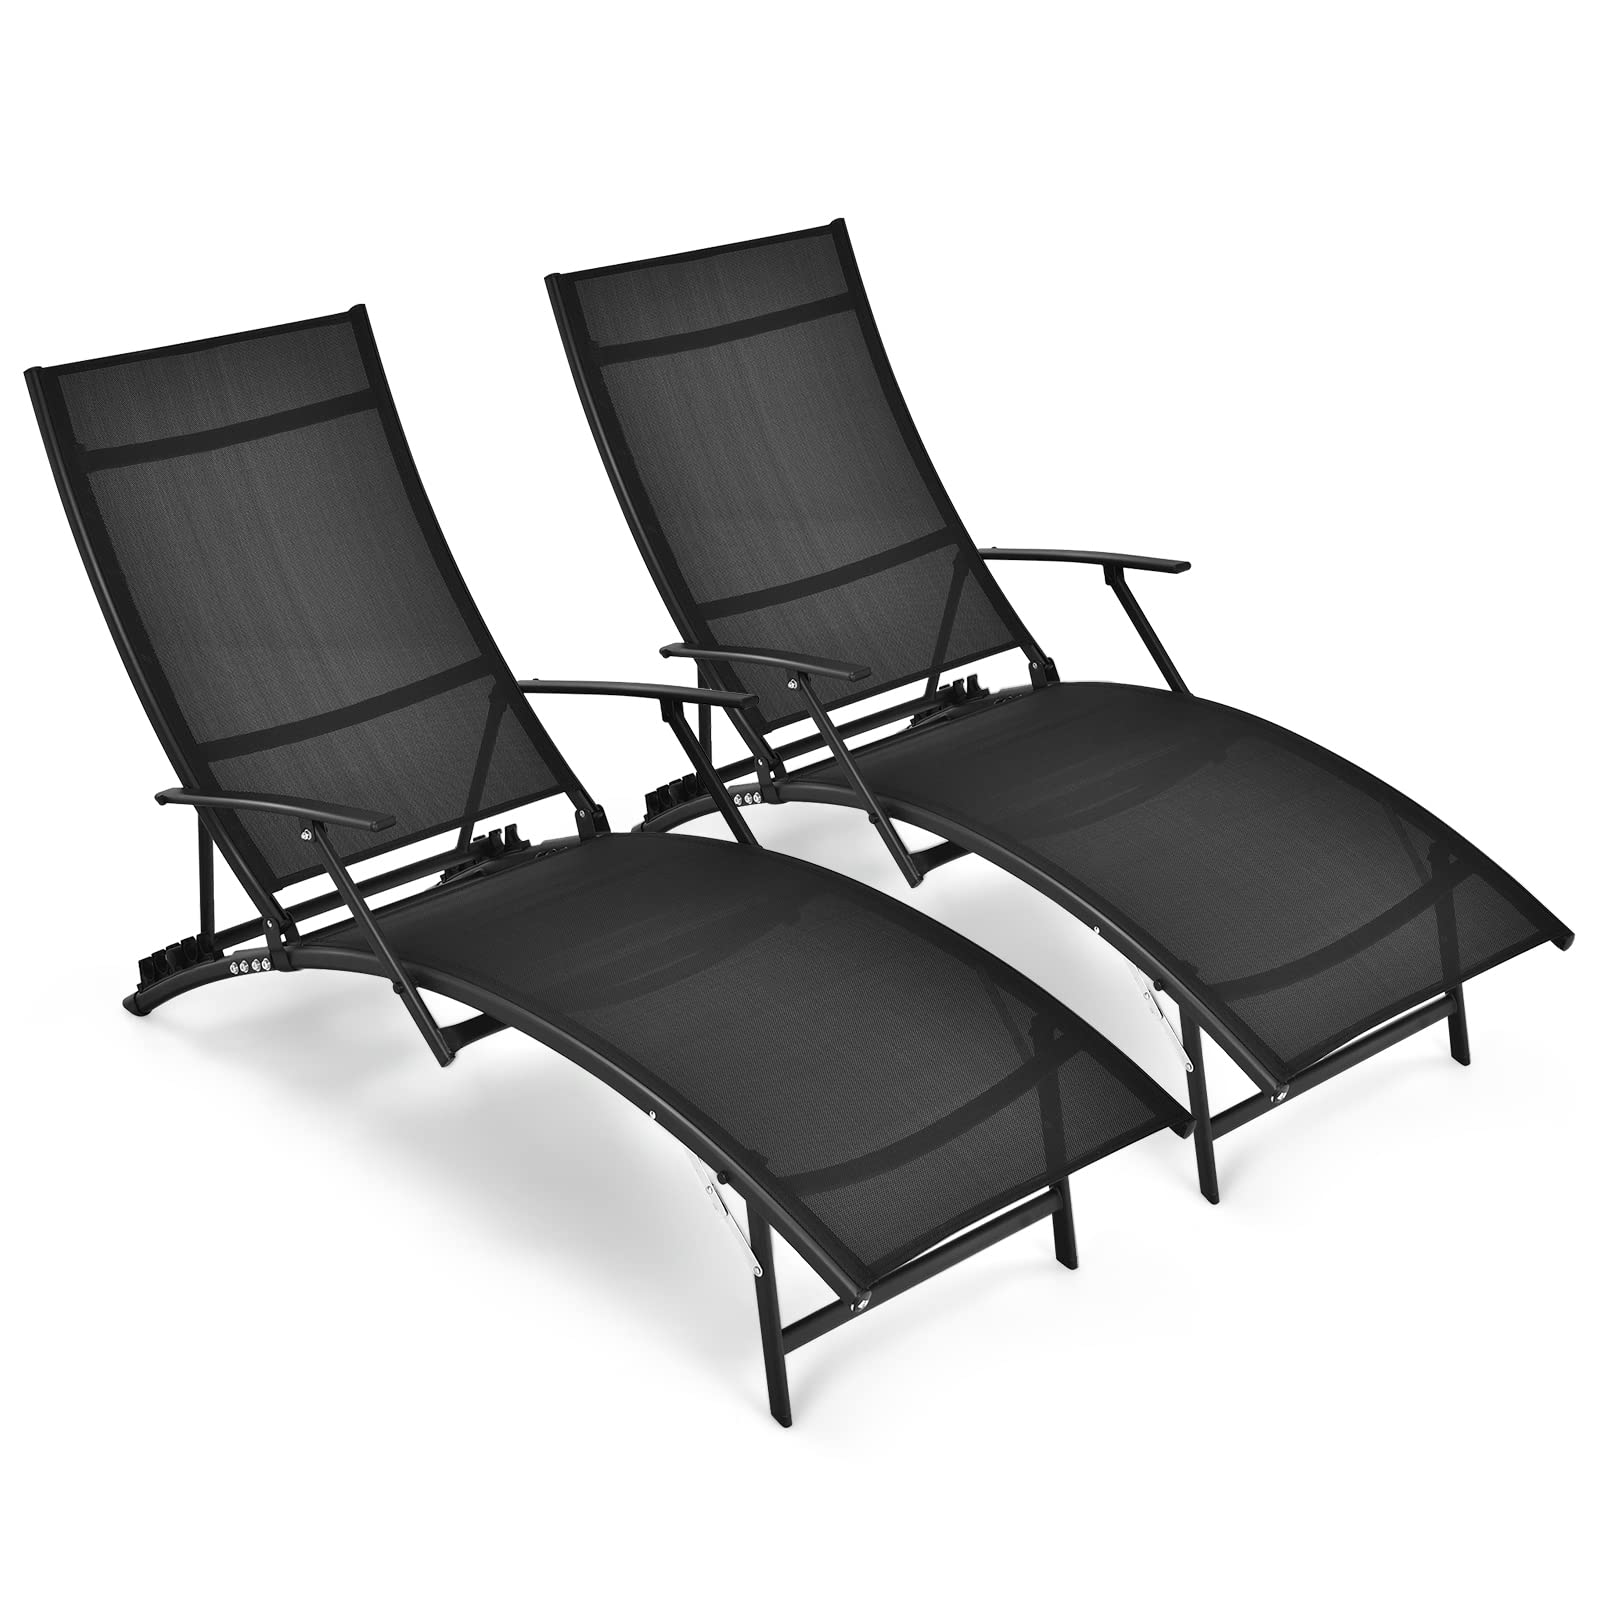 Giantex Set of 2 Patio Chaise Lounge Chairs, with 5-Level Adjustable Backrest, Armrests